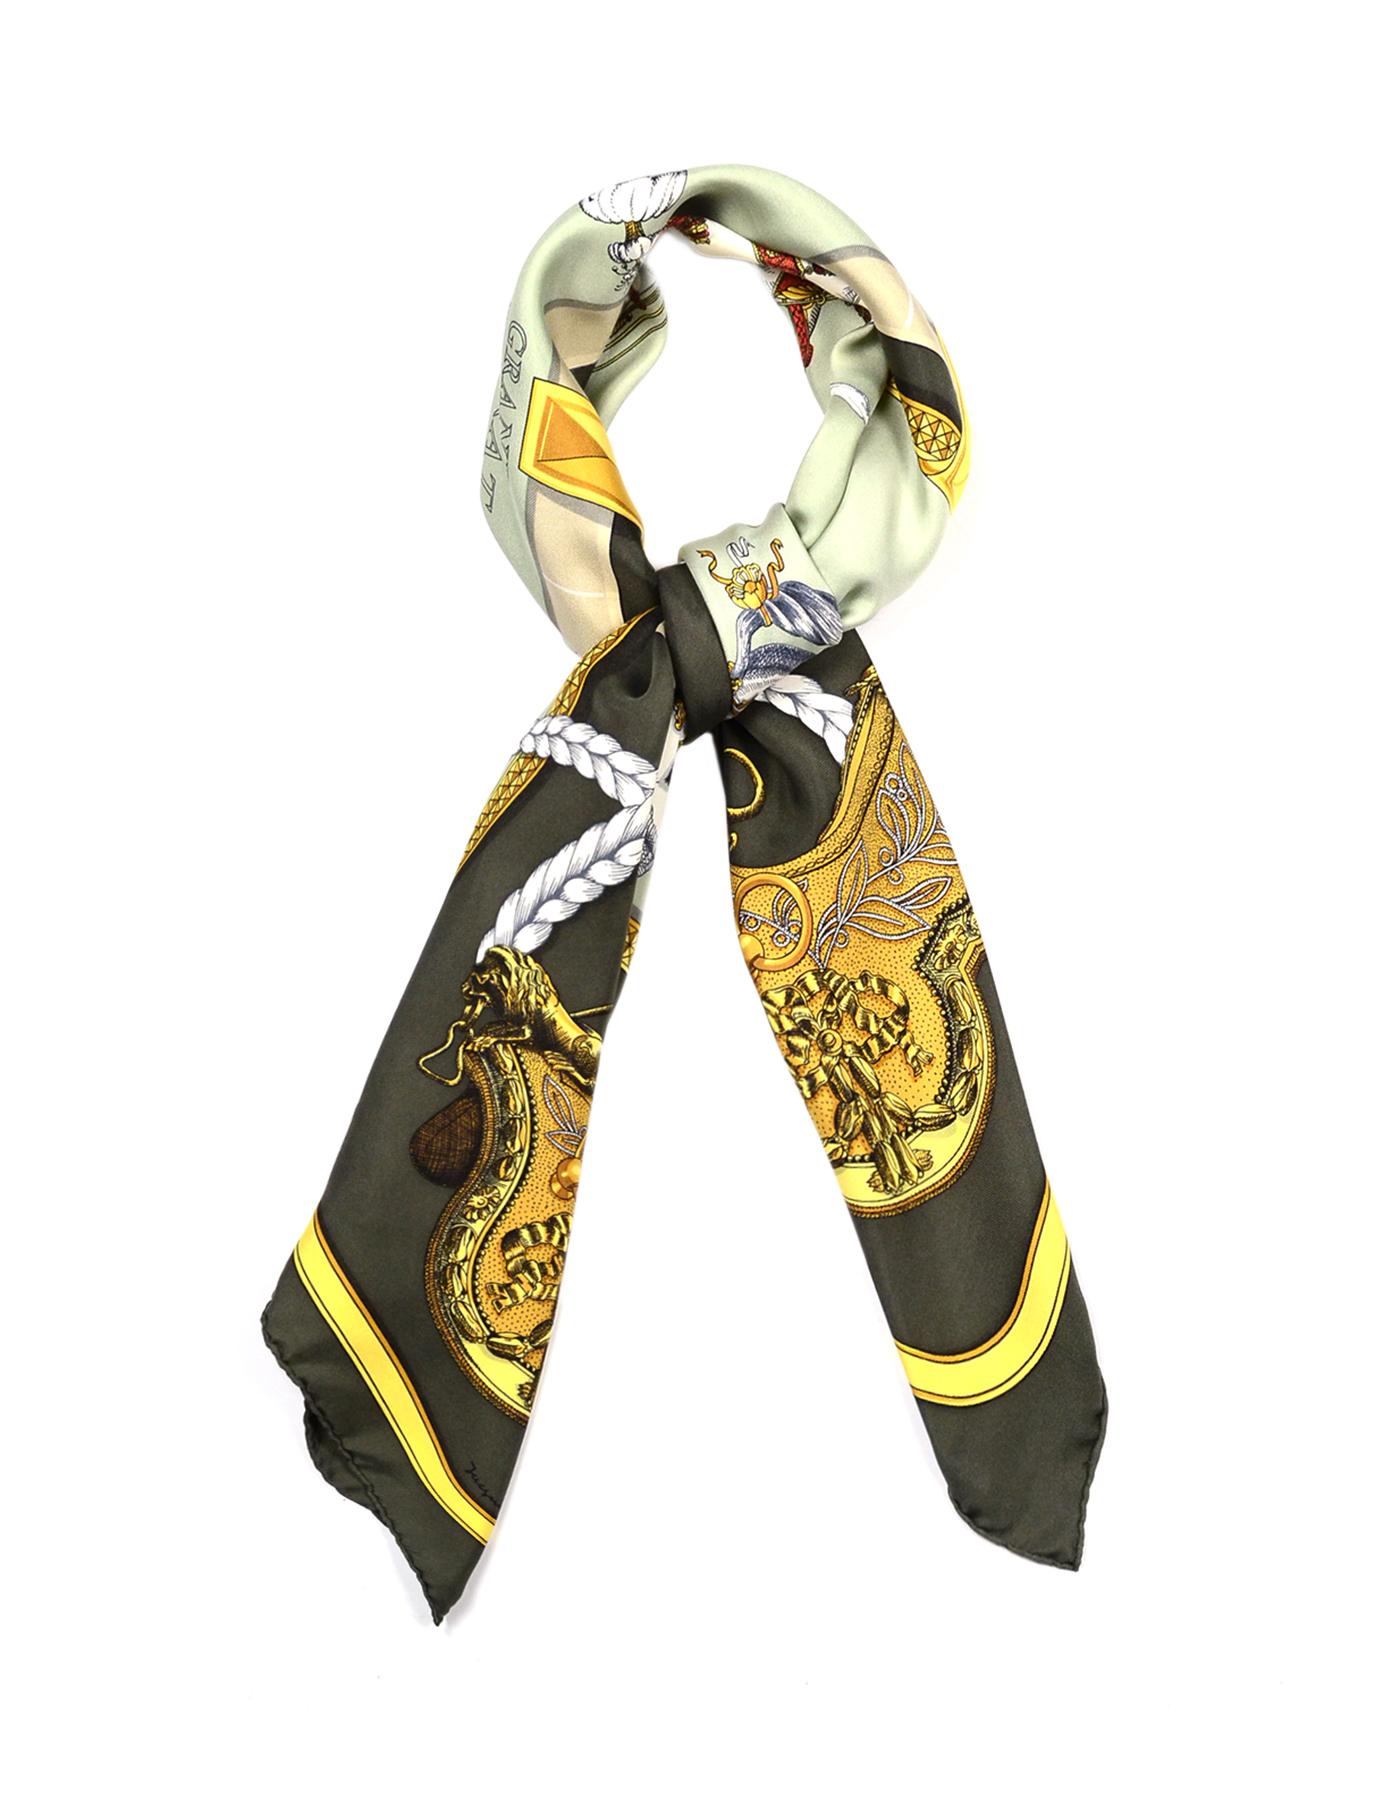 Hermes Green/Gold Grand Apparat 90cm Silk Scarf

Color: Green/gold
Materials: Silk, no composition tag
Overall Condition: Very good pre-owned condition with exception of some light staining.
Estimated Retail: $395 + tax

Measurements: 90 cm
36